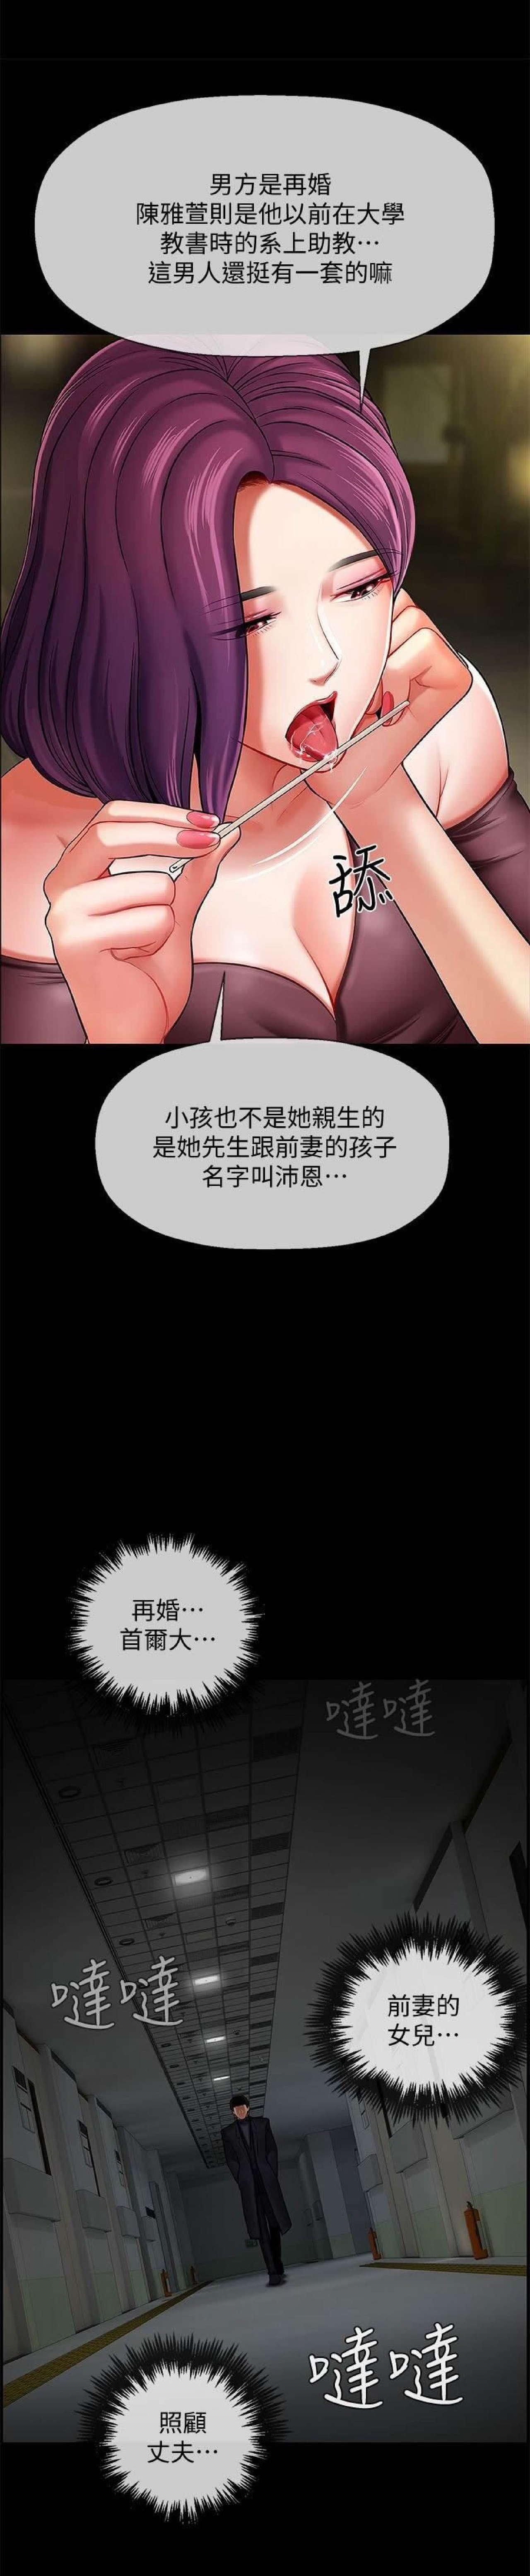 Public Sex 坏老师 | PHYSICAL CLASSROOM 3 Canadian - Page 2